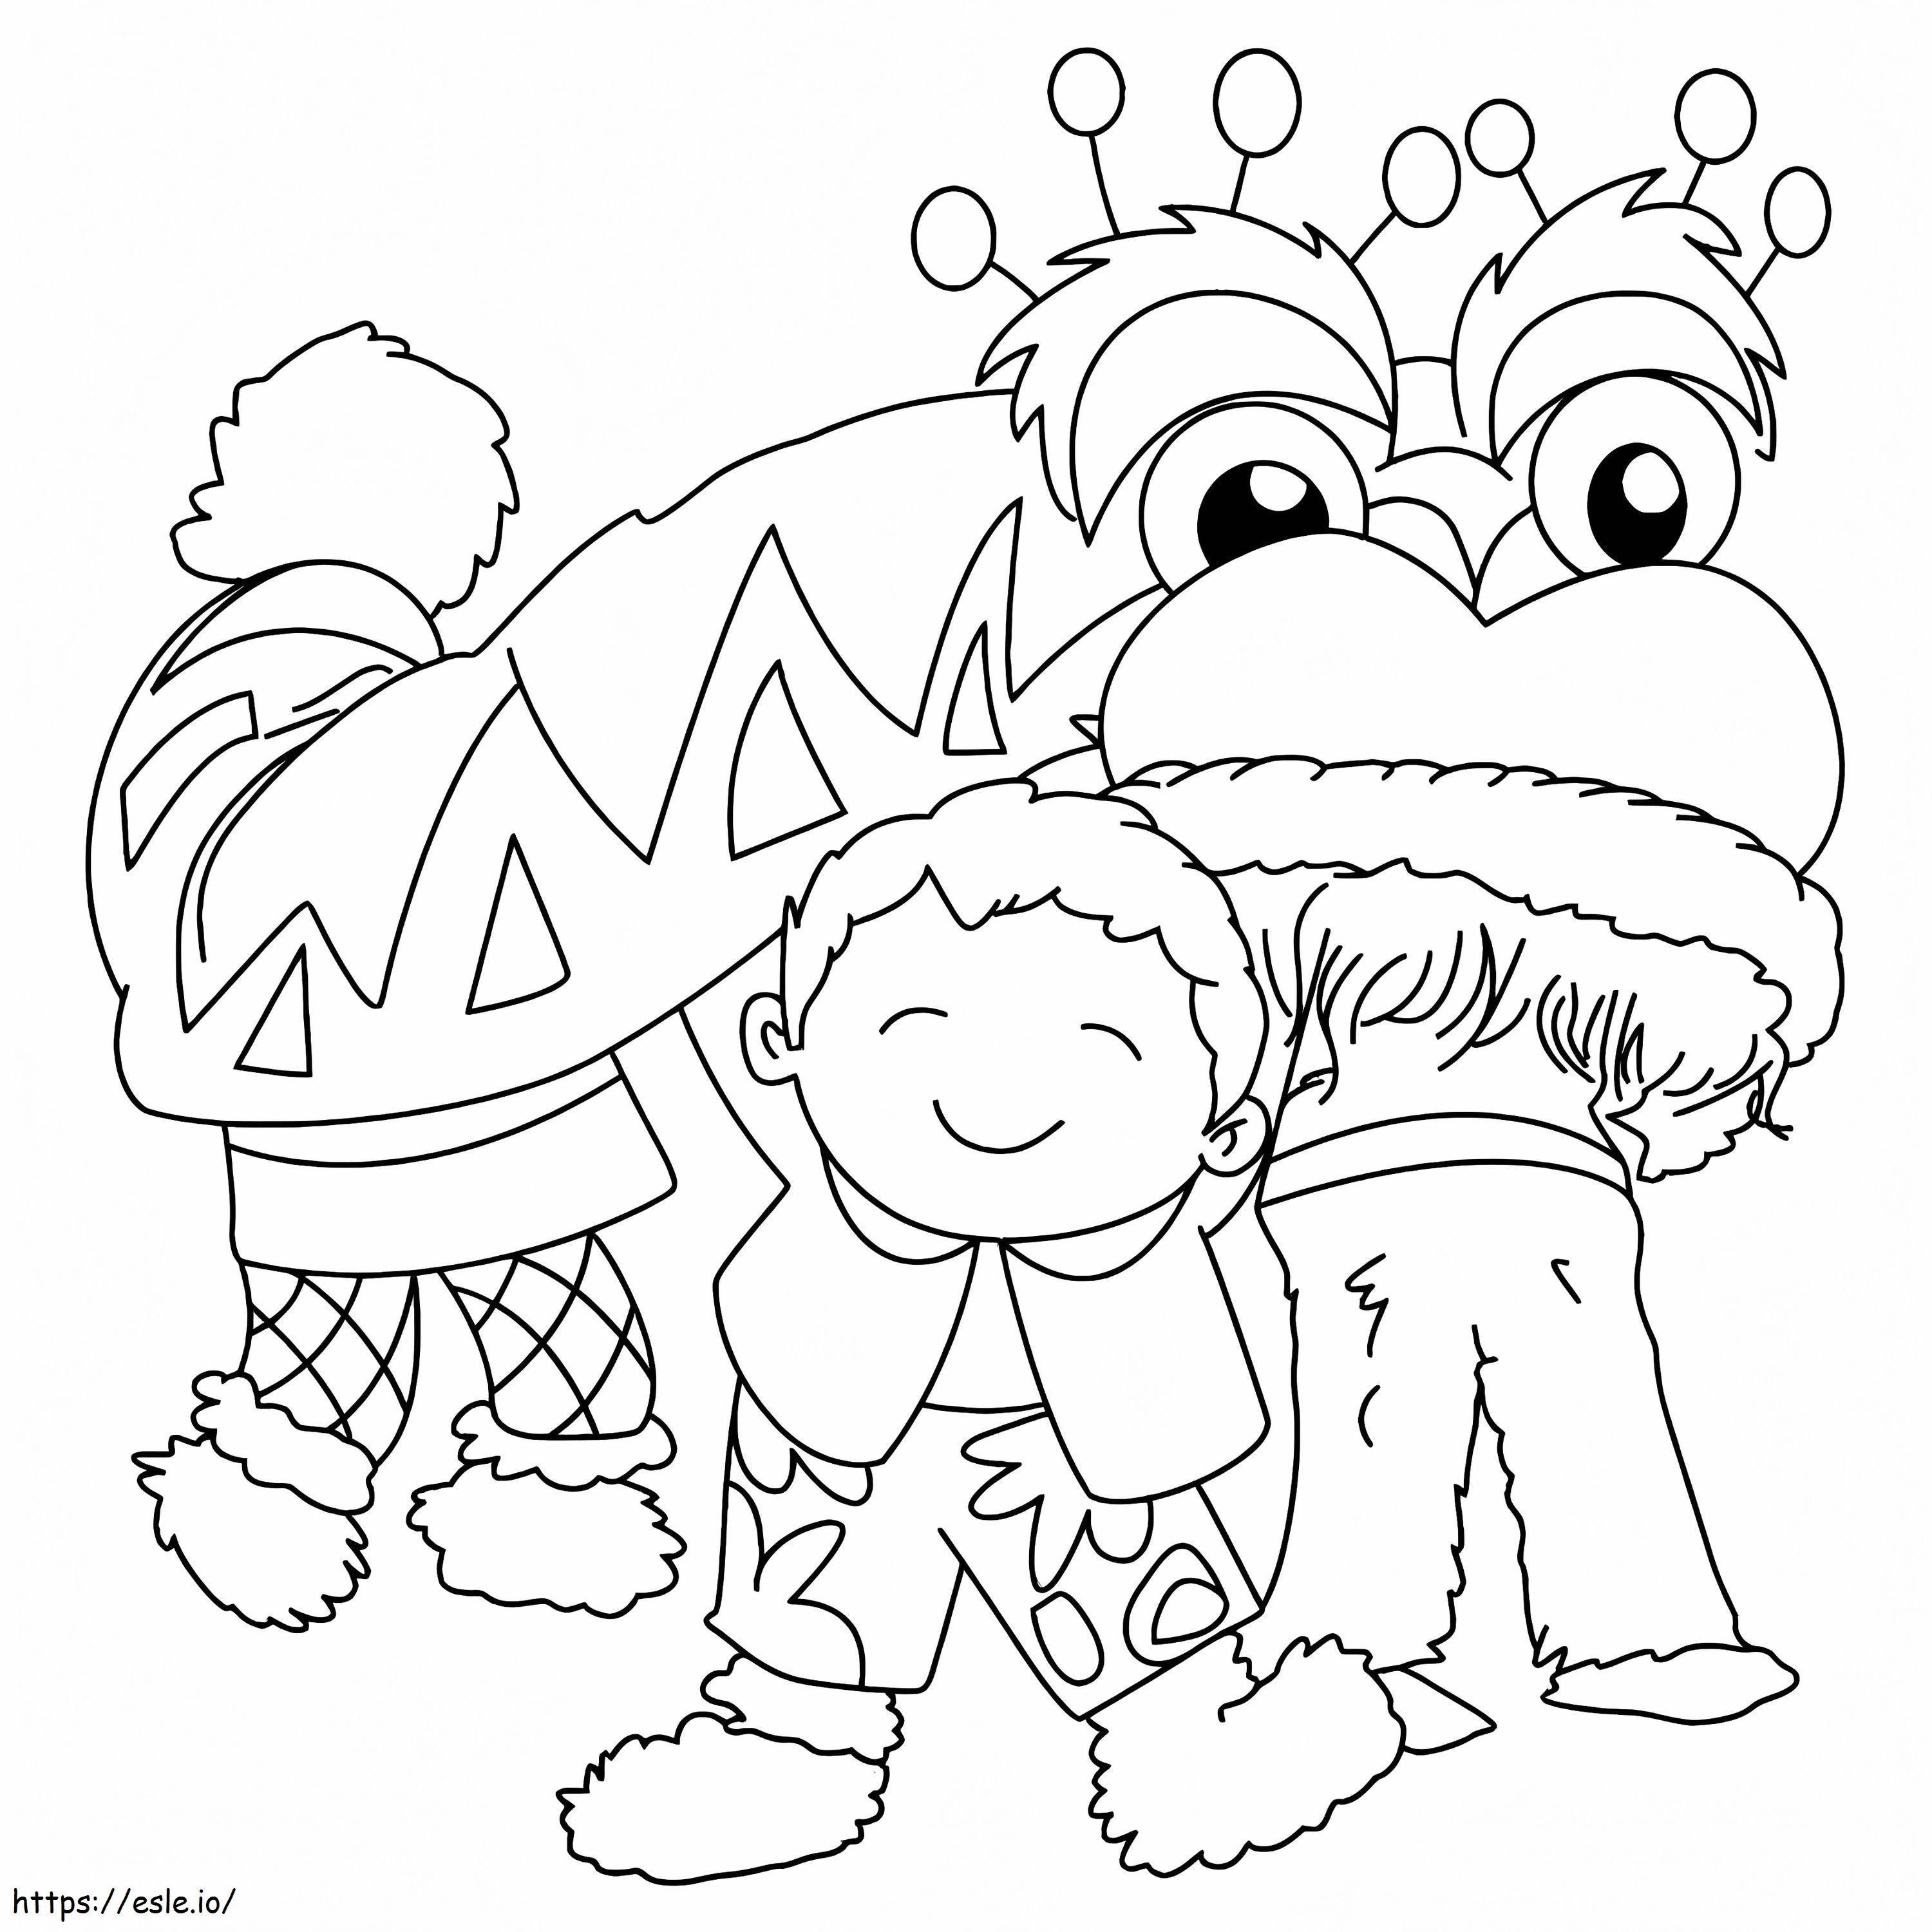 Chinese New Year 2 coloring page